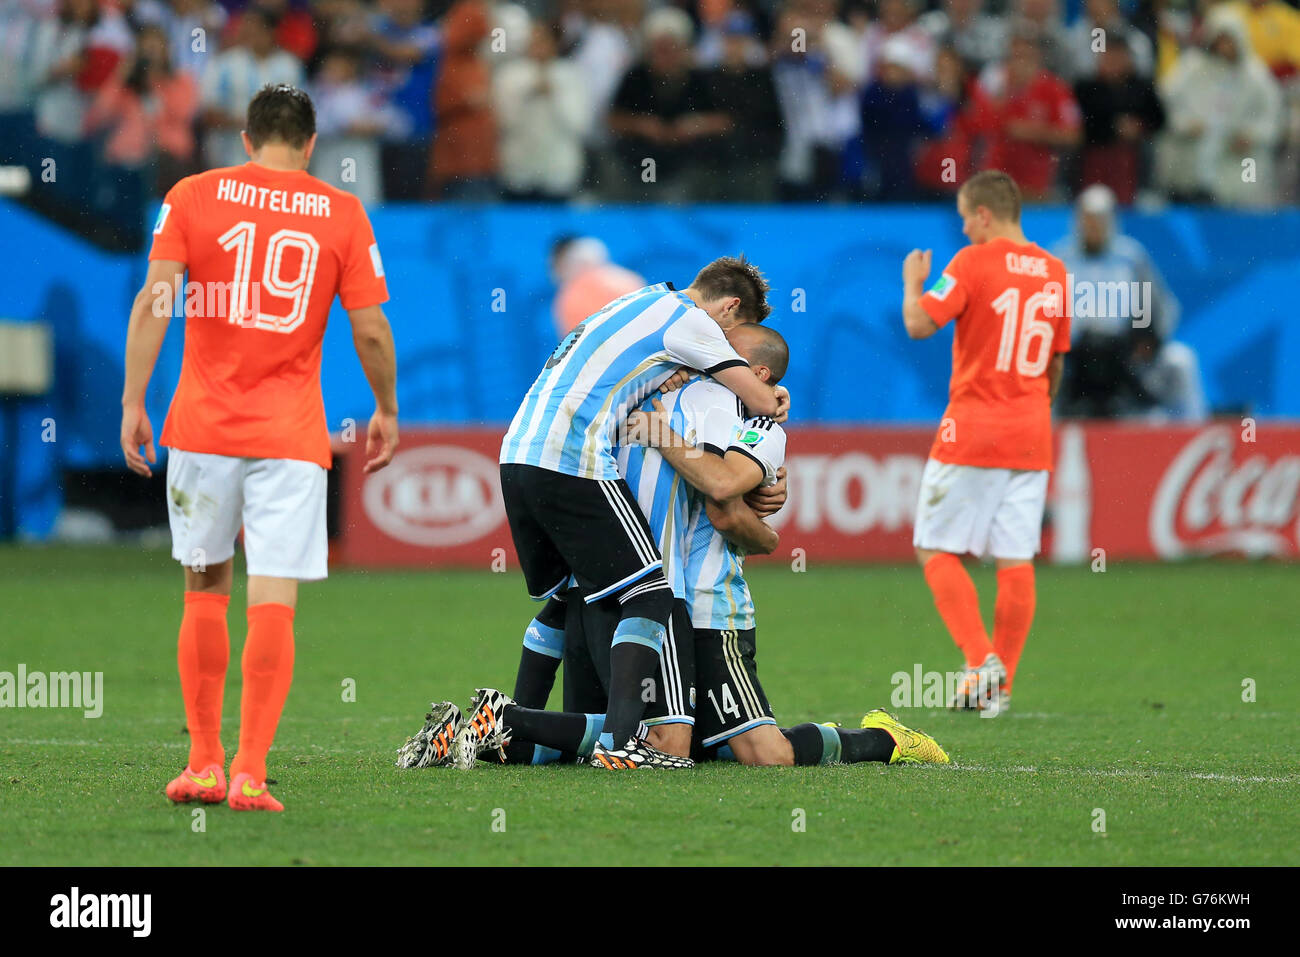 Argentina's Lucas Biglia (centre left) and Javier Mascherano (centre right) celebrate victory in the penalty shoot-out as Netherlands' Klaas Jan Huntelaar (left) and Jordy Clasie (right) are left dejected, during the FIFA World Cup Semi Final at the Arena de Sao Paulo, Sao Paulo, Brazil. Stock Photo